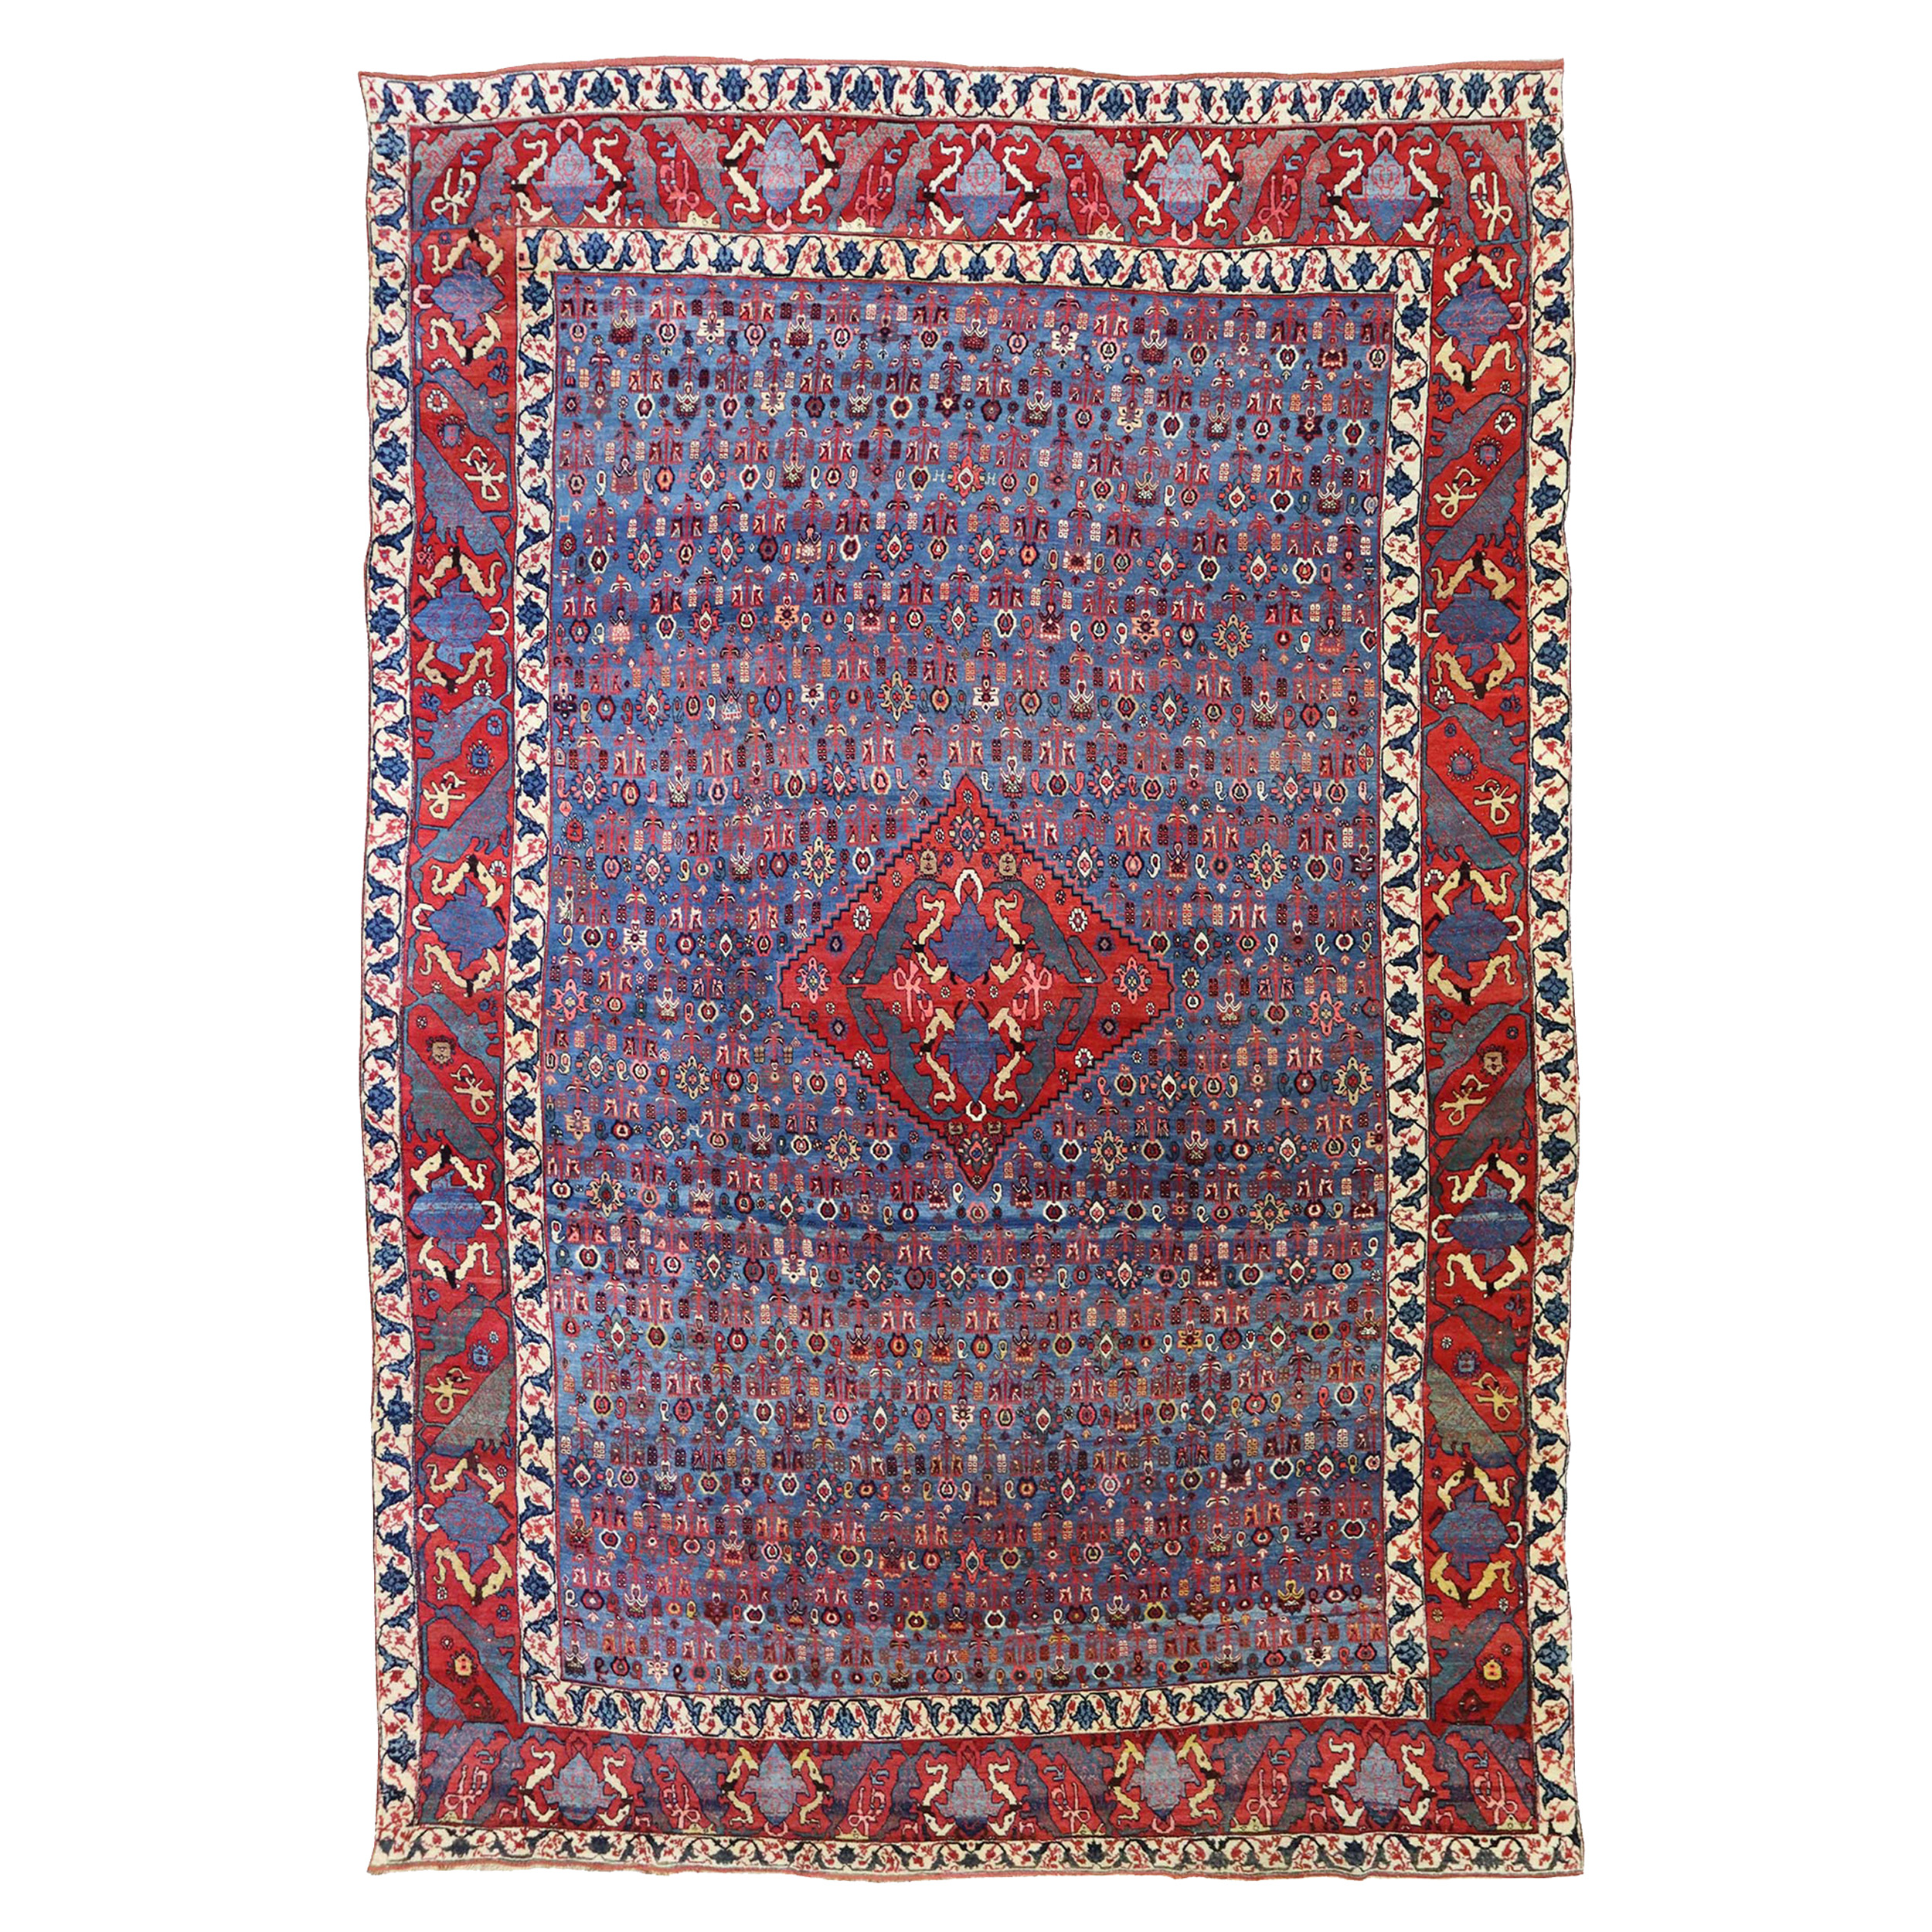 An antique Persian Bidjar (Gerus) carpet with a distinctive design featuring small, stylized flowers on an abrashed mid blue field, circa 1890. Douglas Stock Gallery is one of America's most selective dealers in antique Persian carpets and other types of antique Oriental rugs.